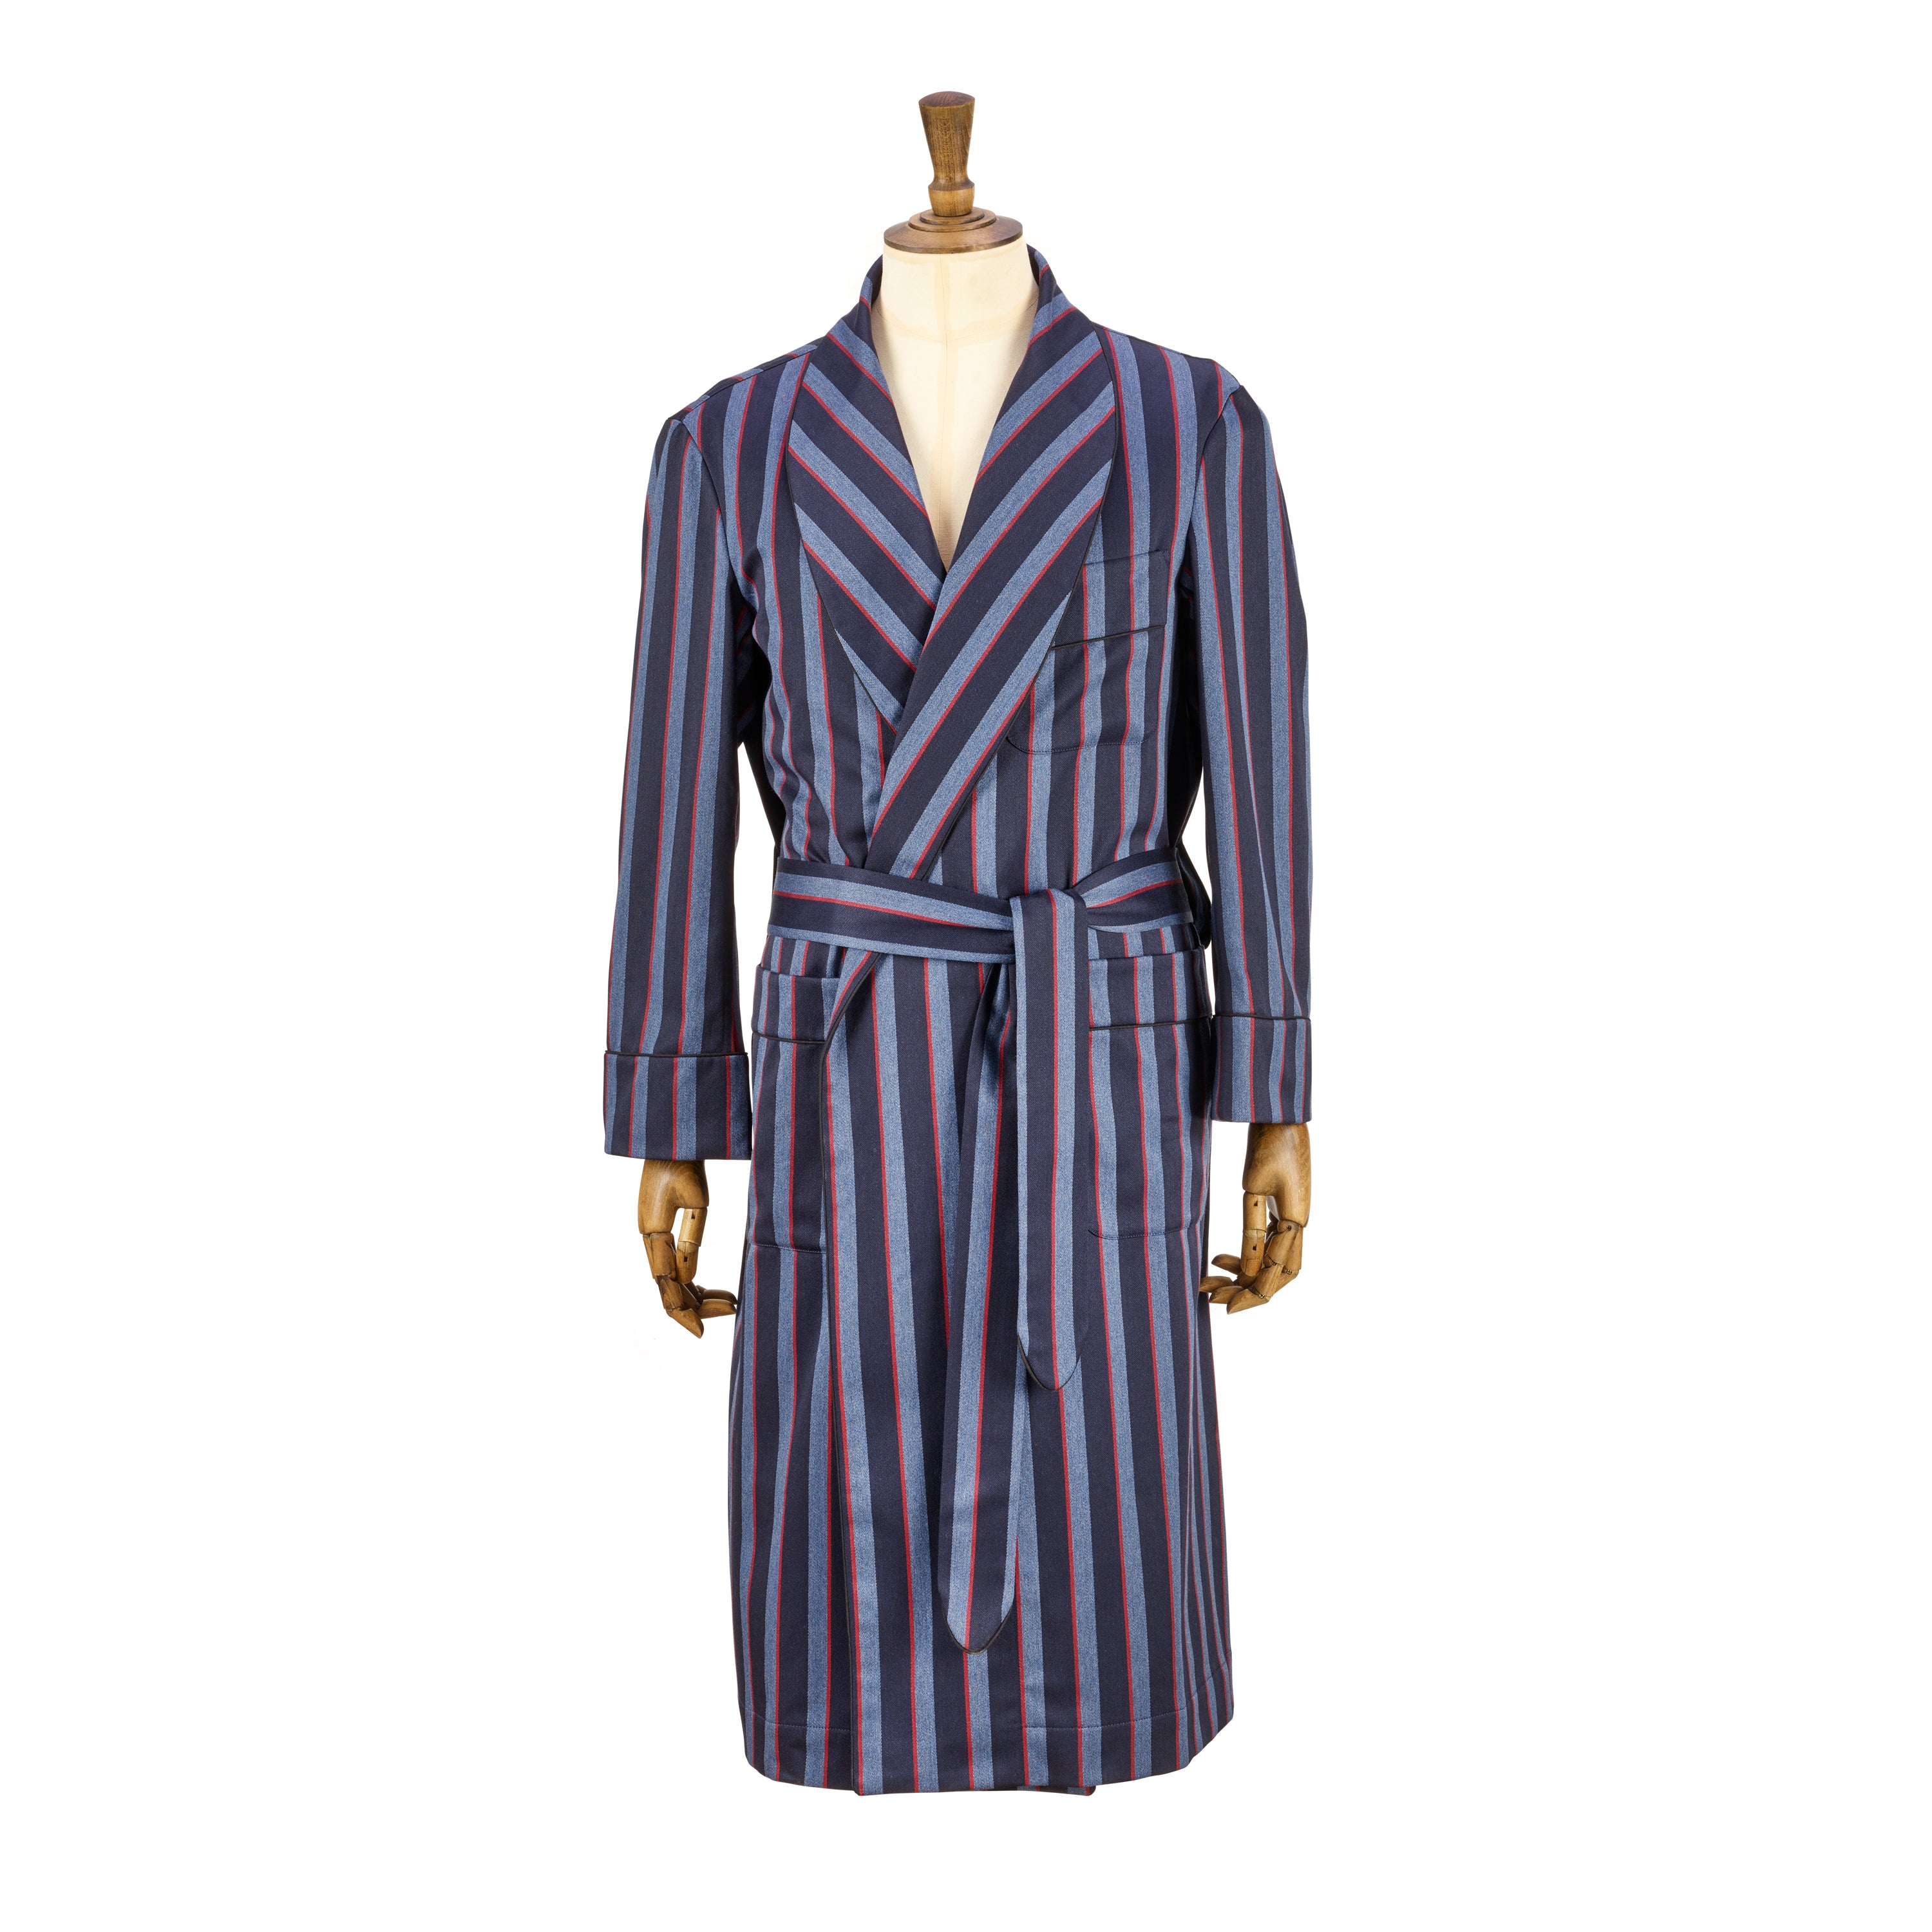 Fox Lounge Gown in Buckingham Stripe with Black Piping